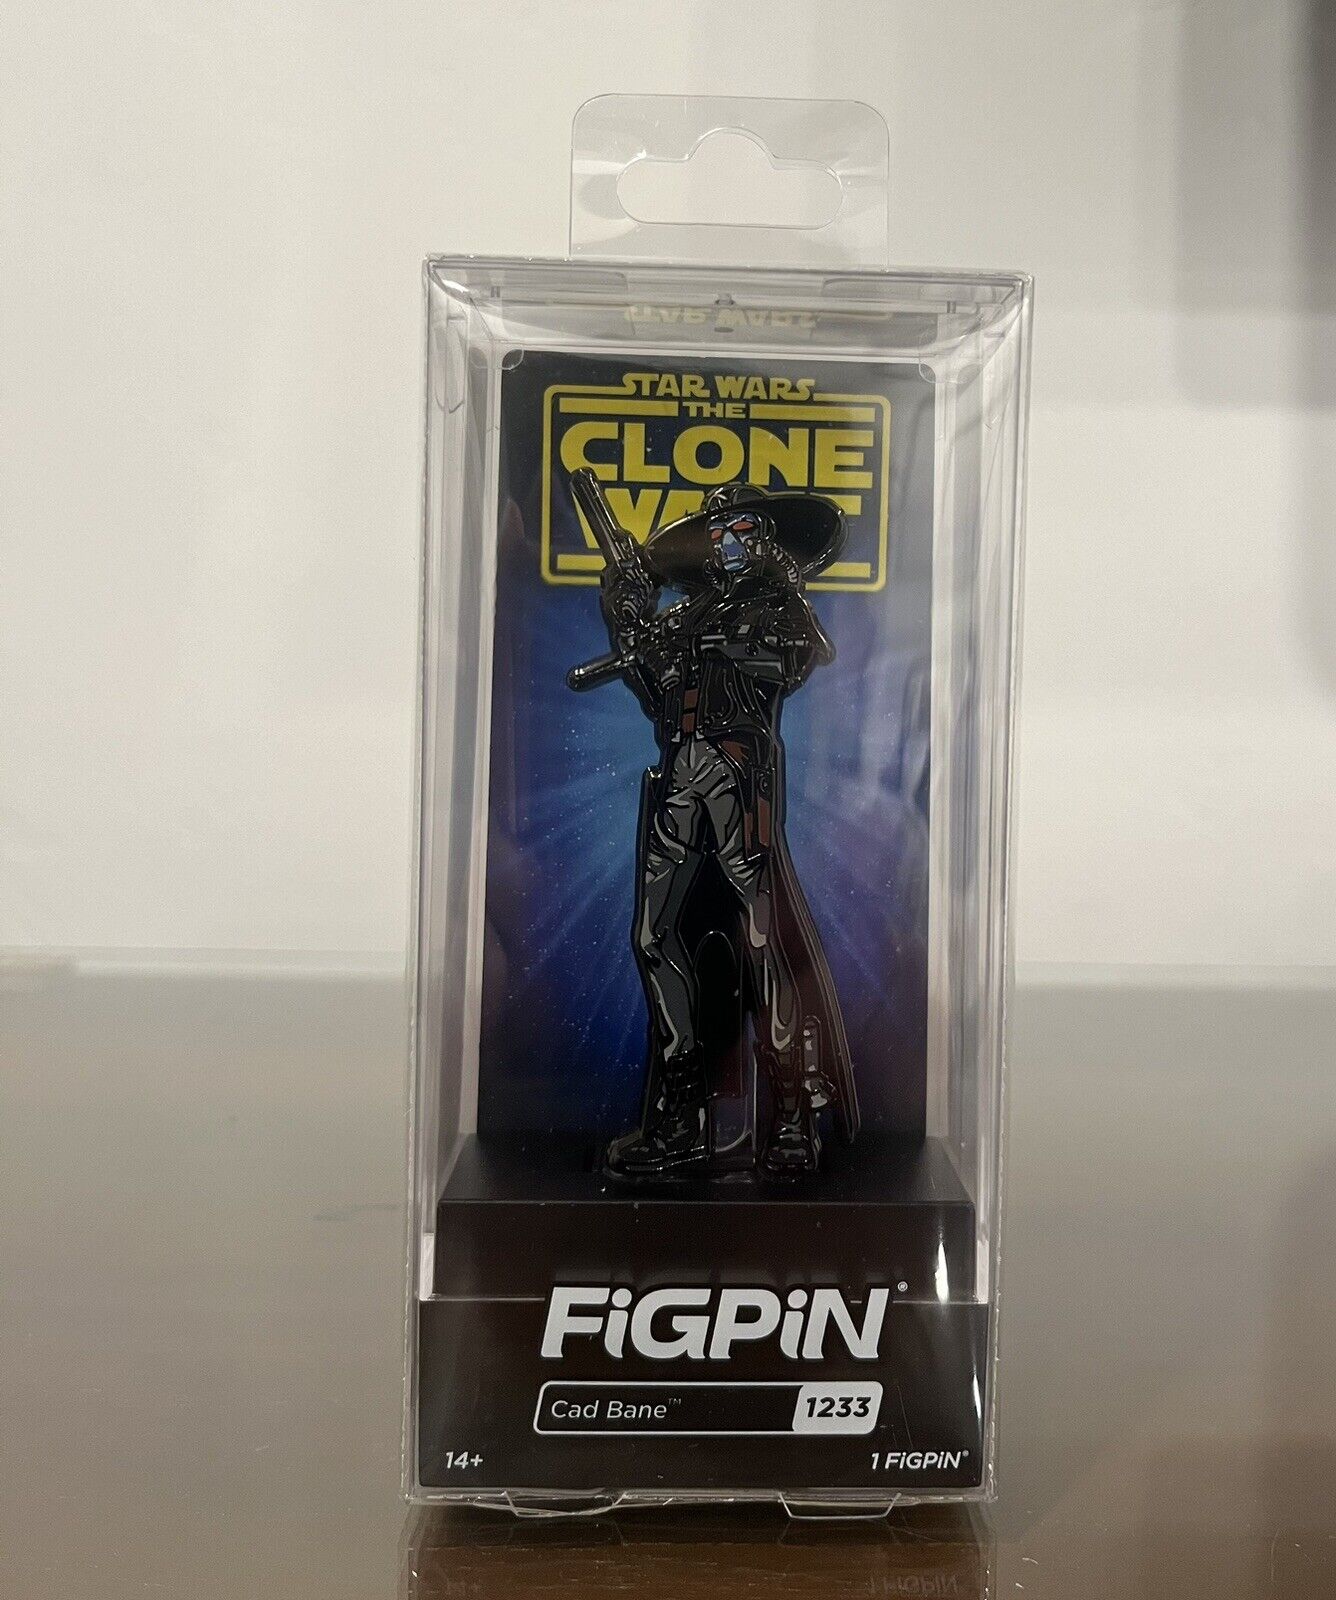 Figpin Star Wars The Clone Wars Cad Bane #1233 Pops & Pins Exclusive LE 1000